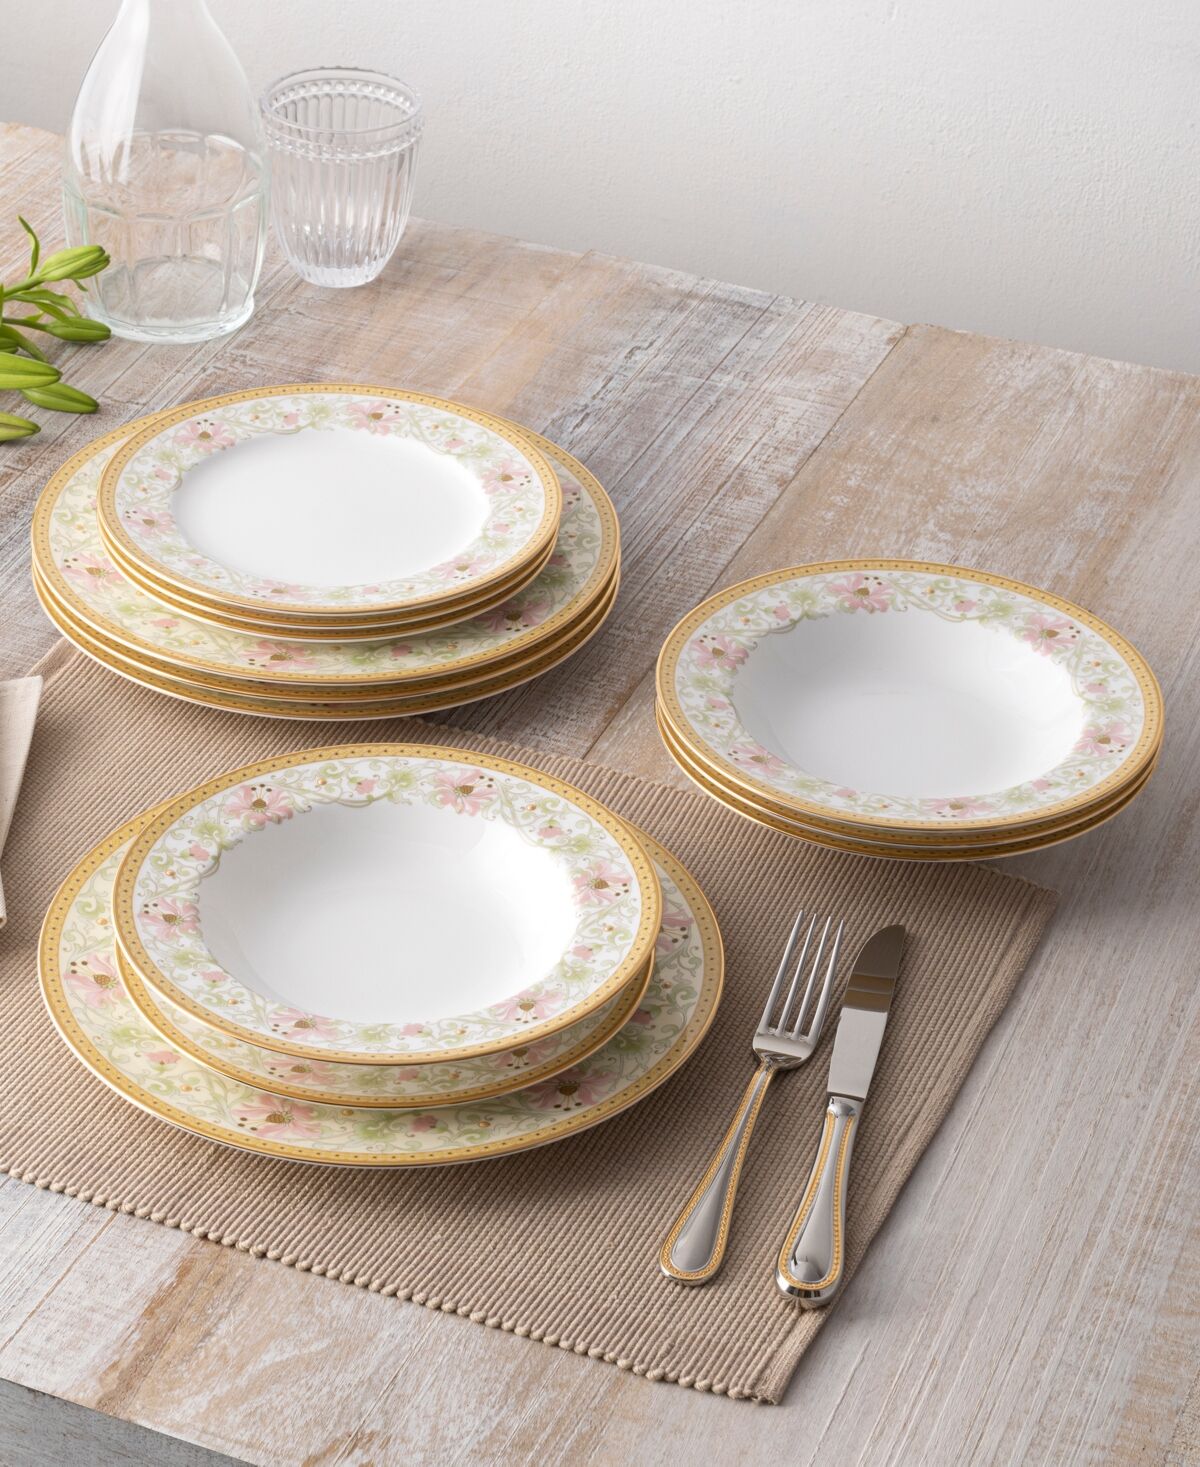 Noritake Blooming Splendor 12 Piece Set, Service For 4 - White and Pink